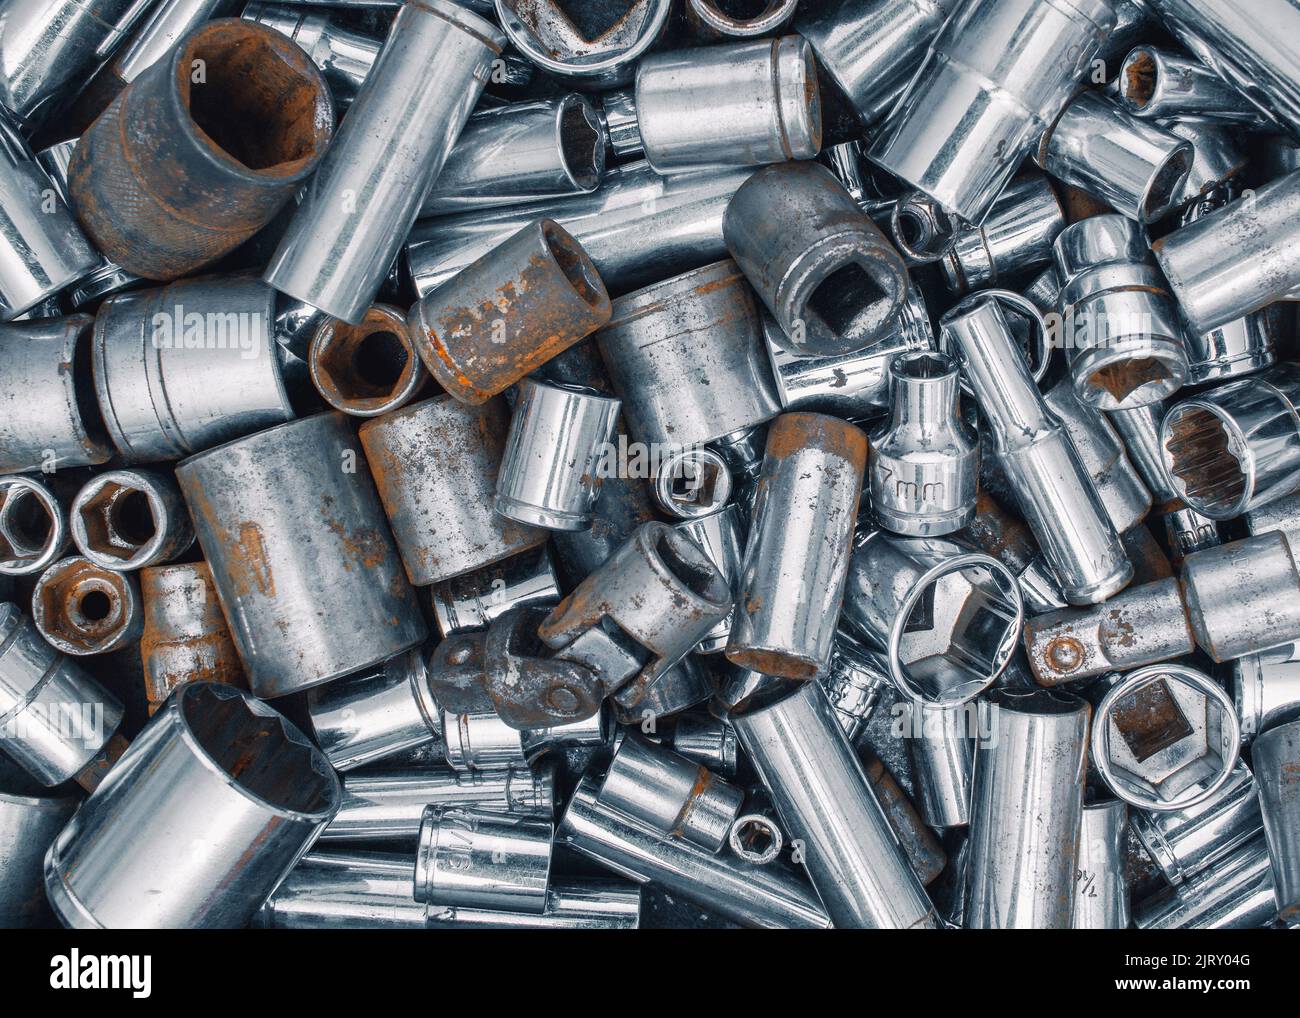 Collection of old ratchet wrench sockets Stock Photo